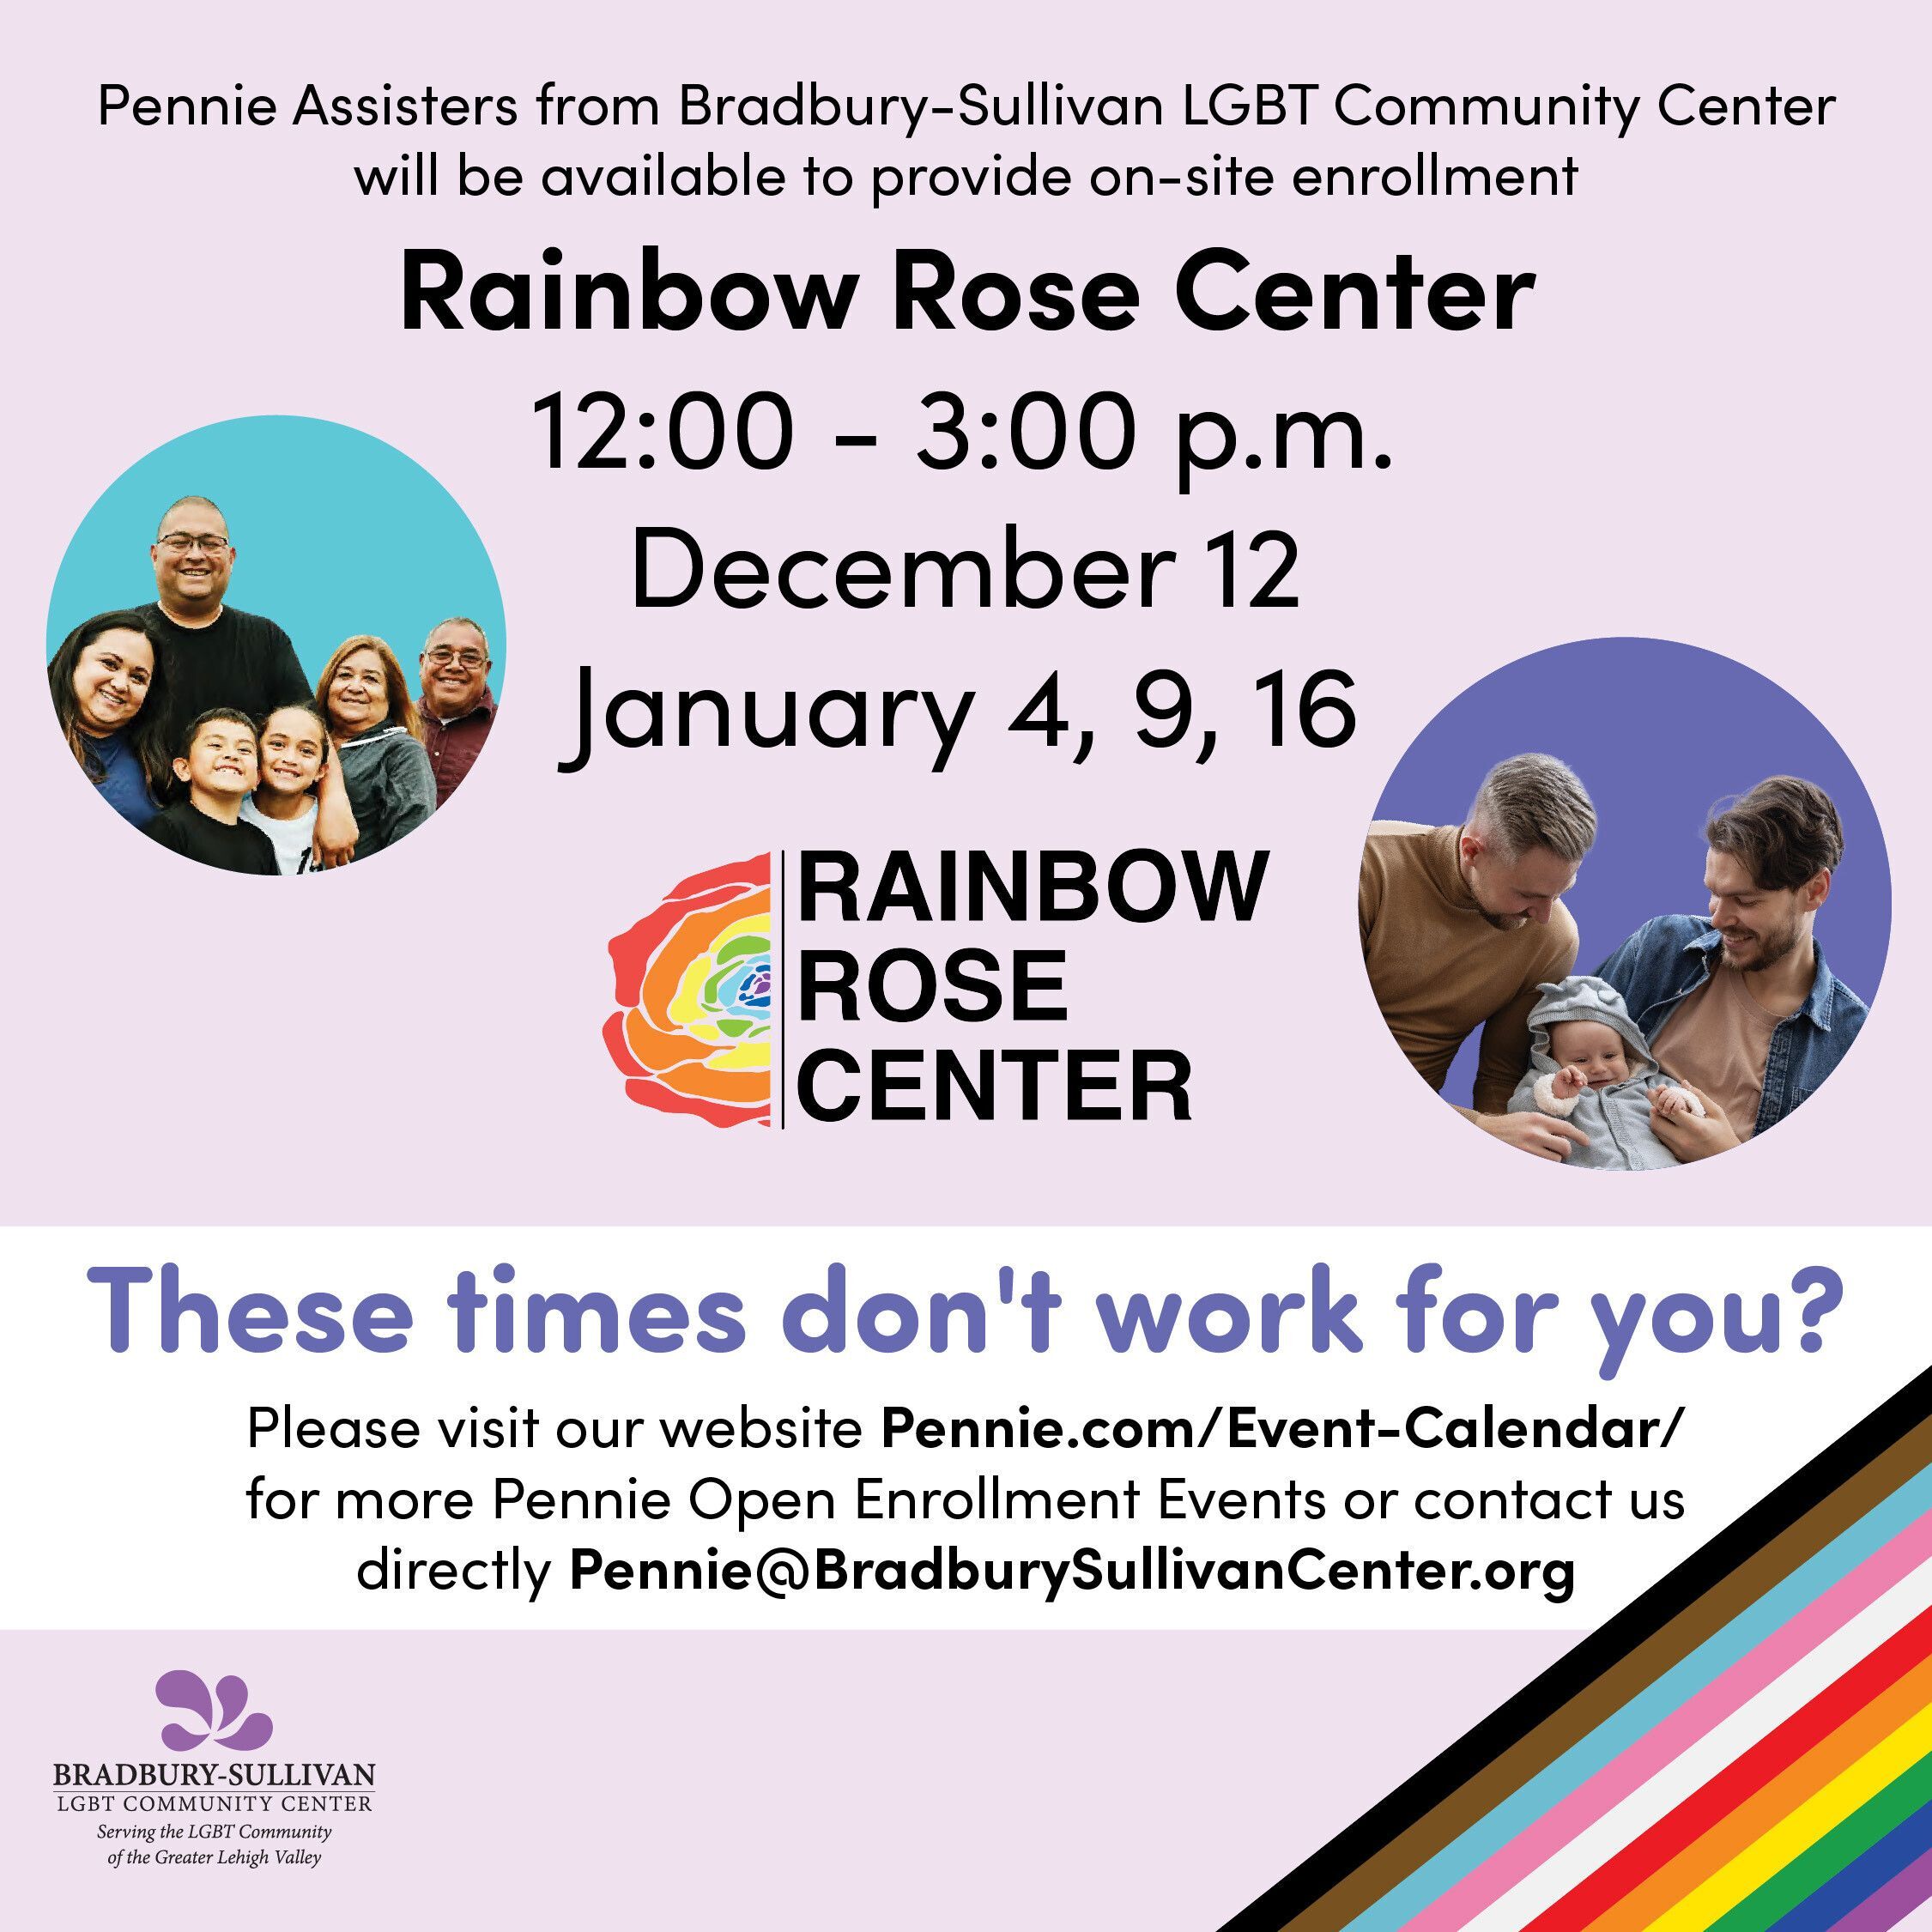 Pennie Enrollment Assistance at the Rainbow Rose Center!